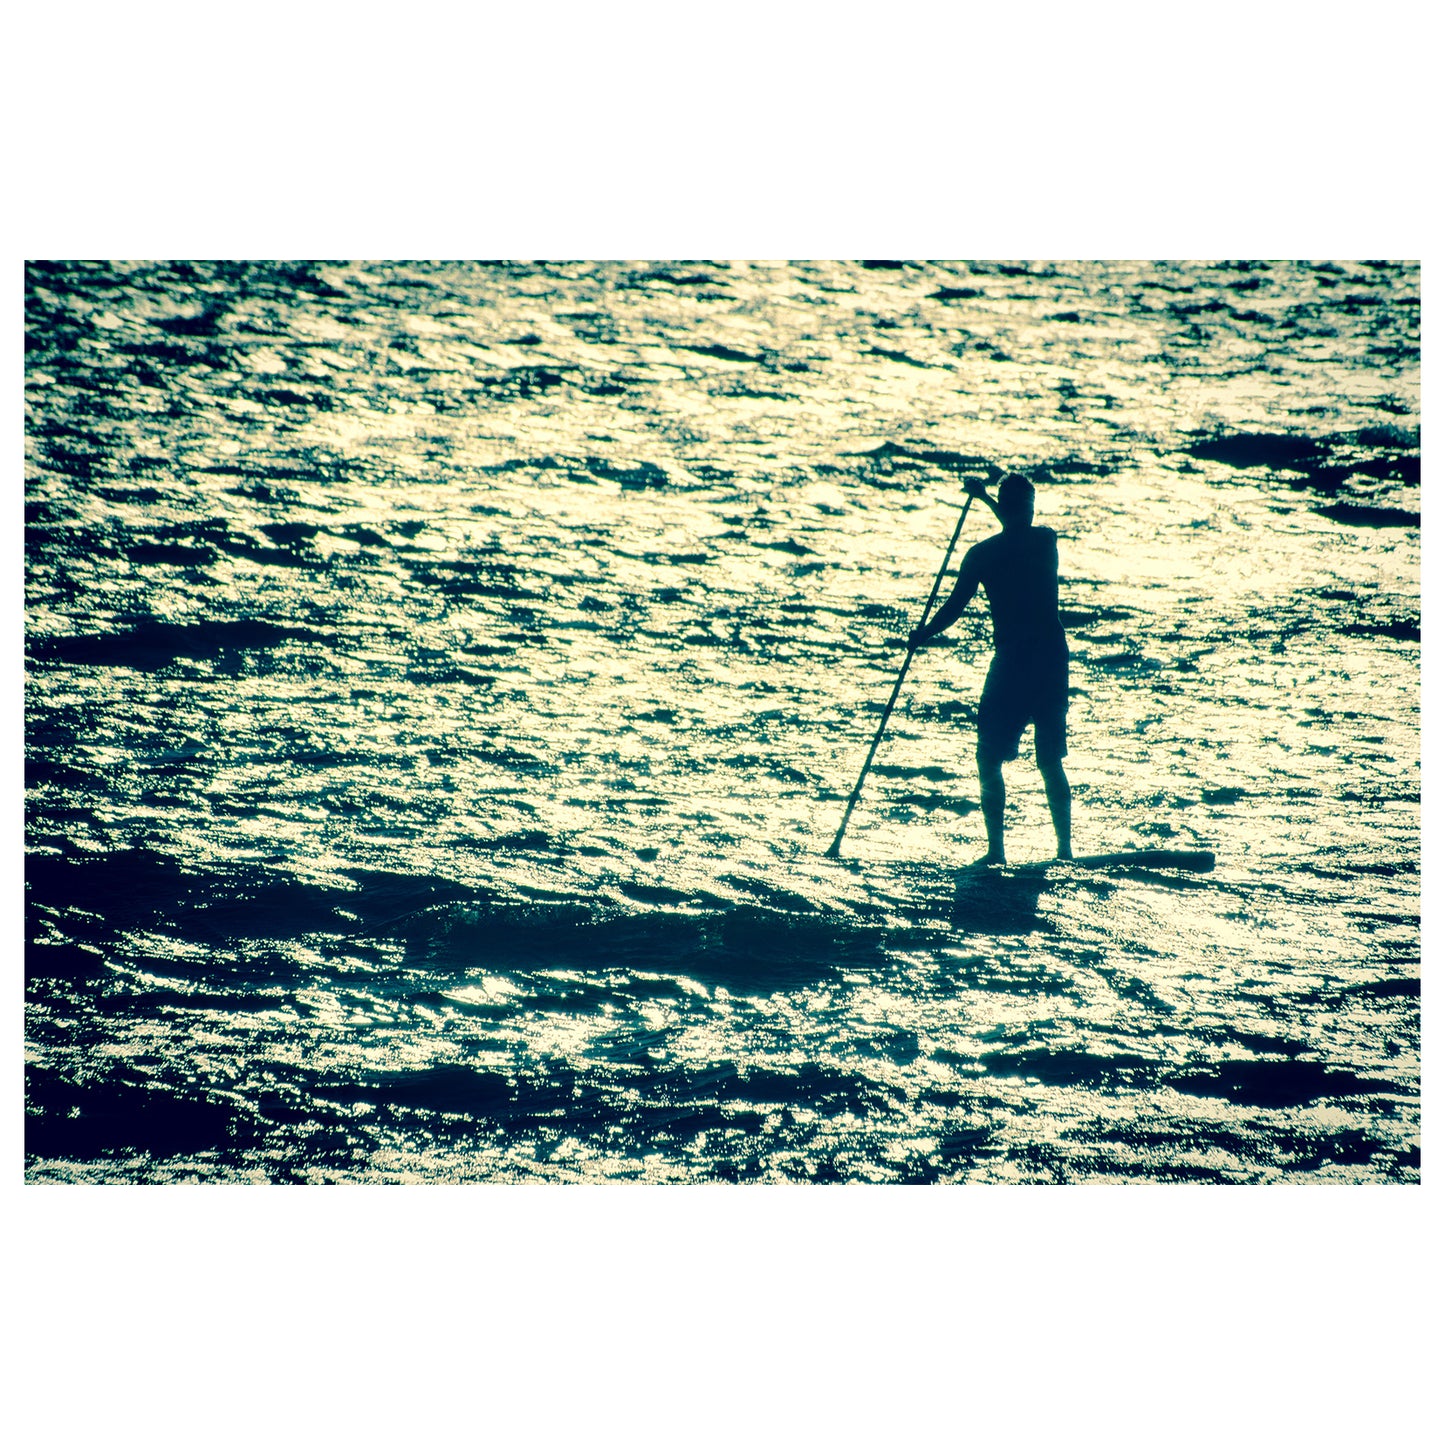 Paddle Surfer and Ocean Reflections Colorized Abstract Photo Fine Art Canvas & Unframed Wall Art Prints  - PIPAFINEART